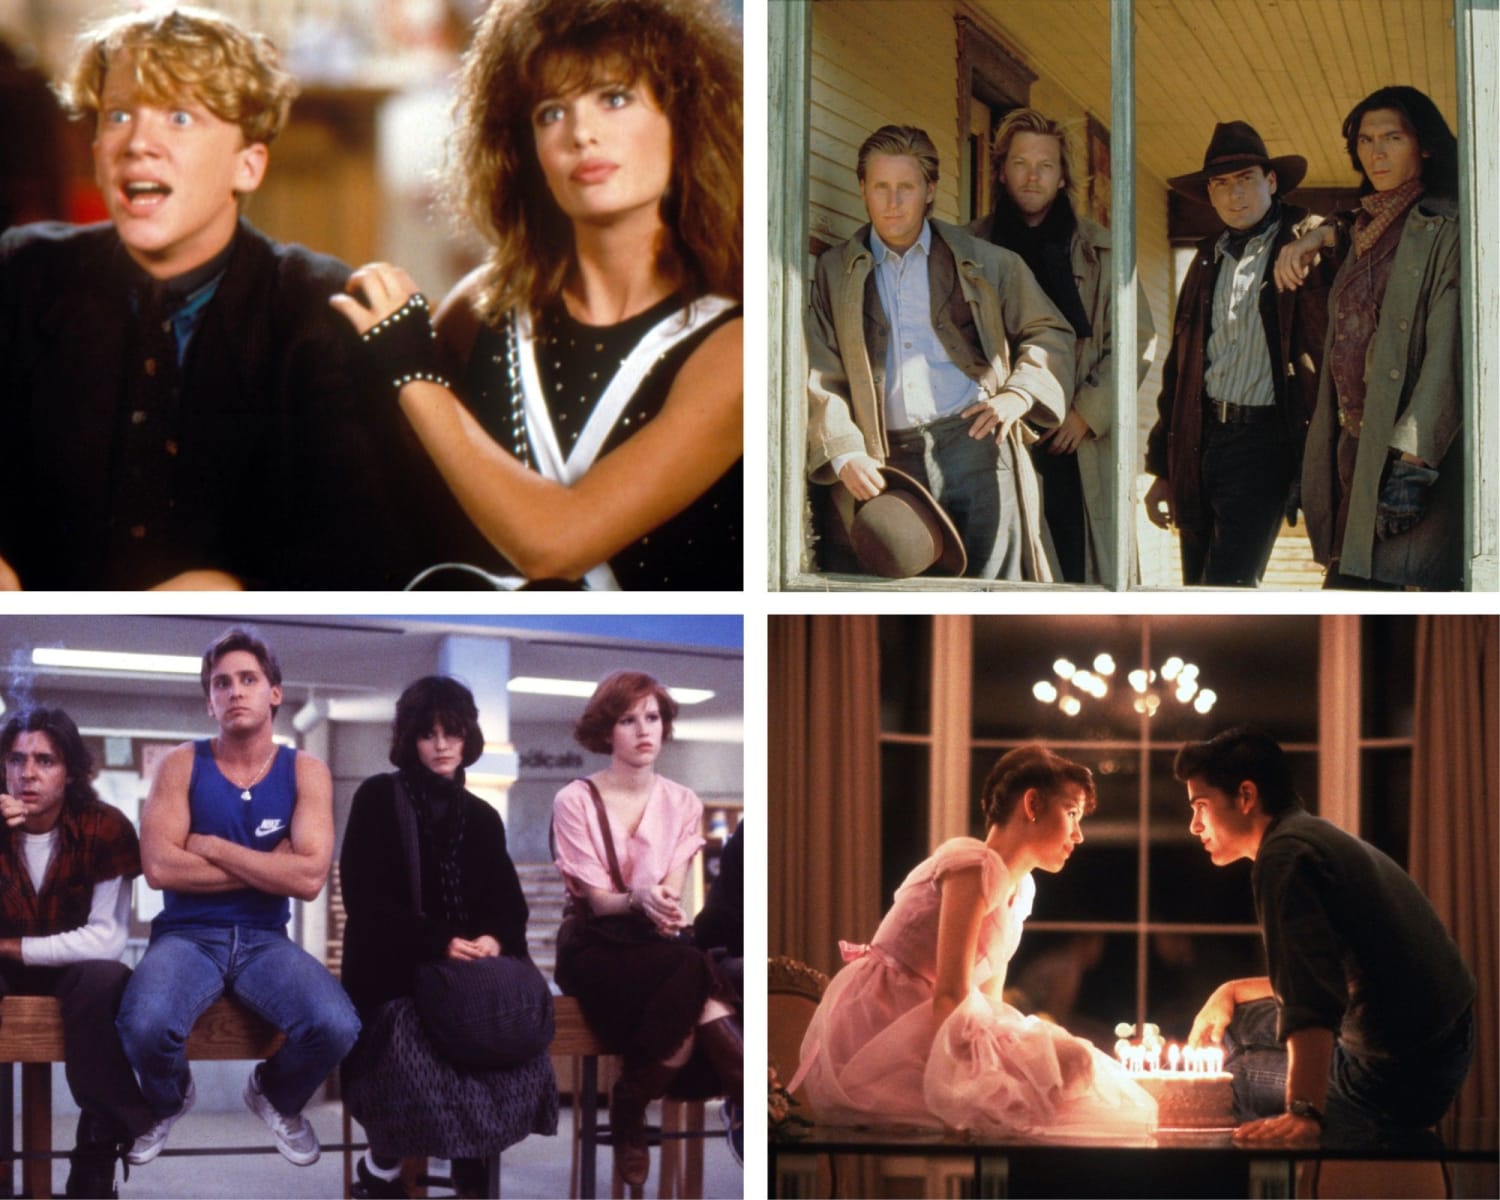 The 10 greatest Brat Pack films, from The Breakfast Club to Sixteen Candles